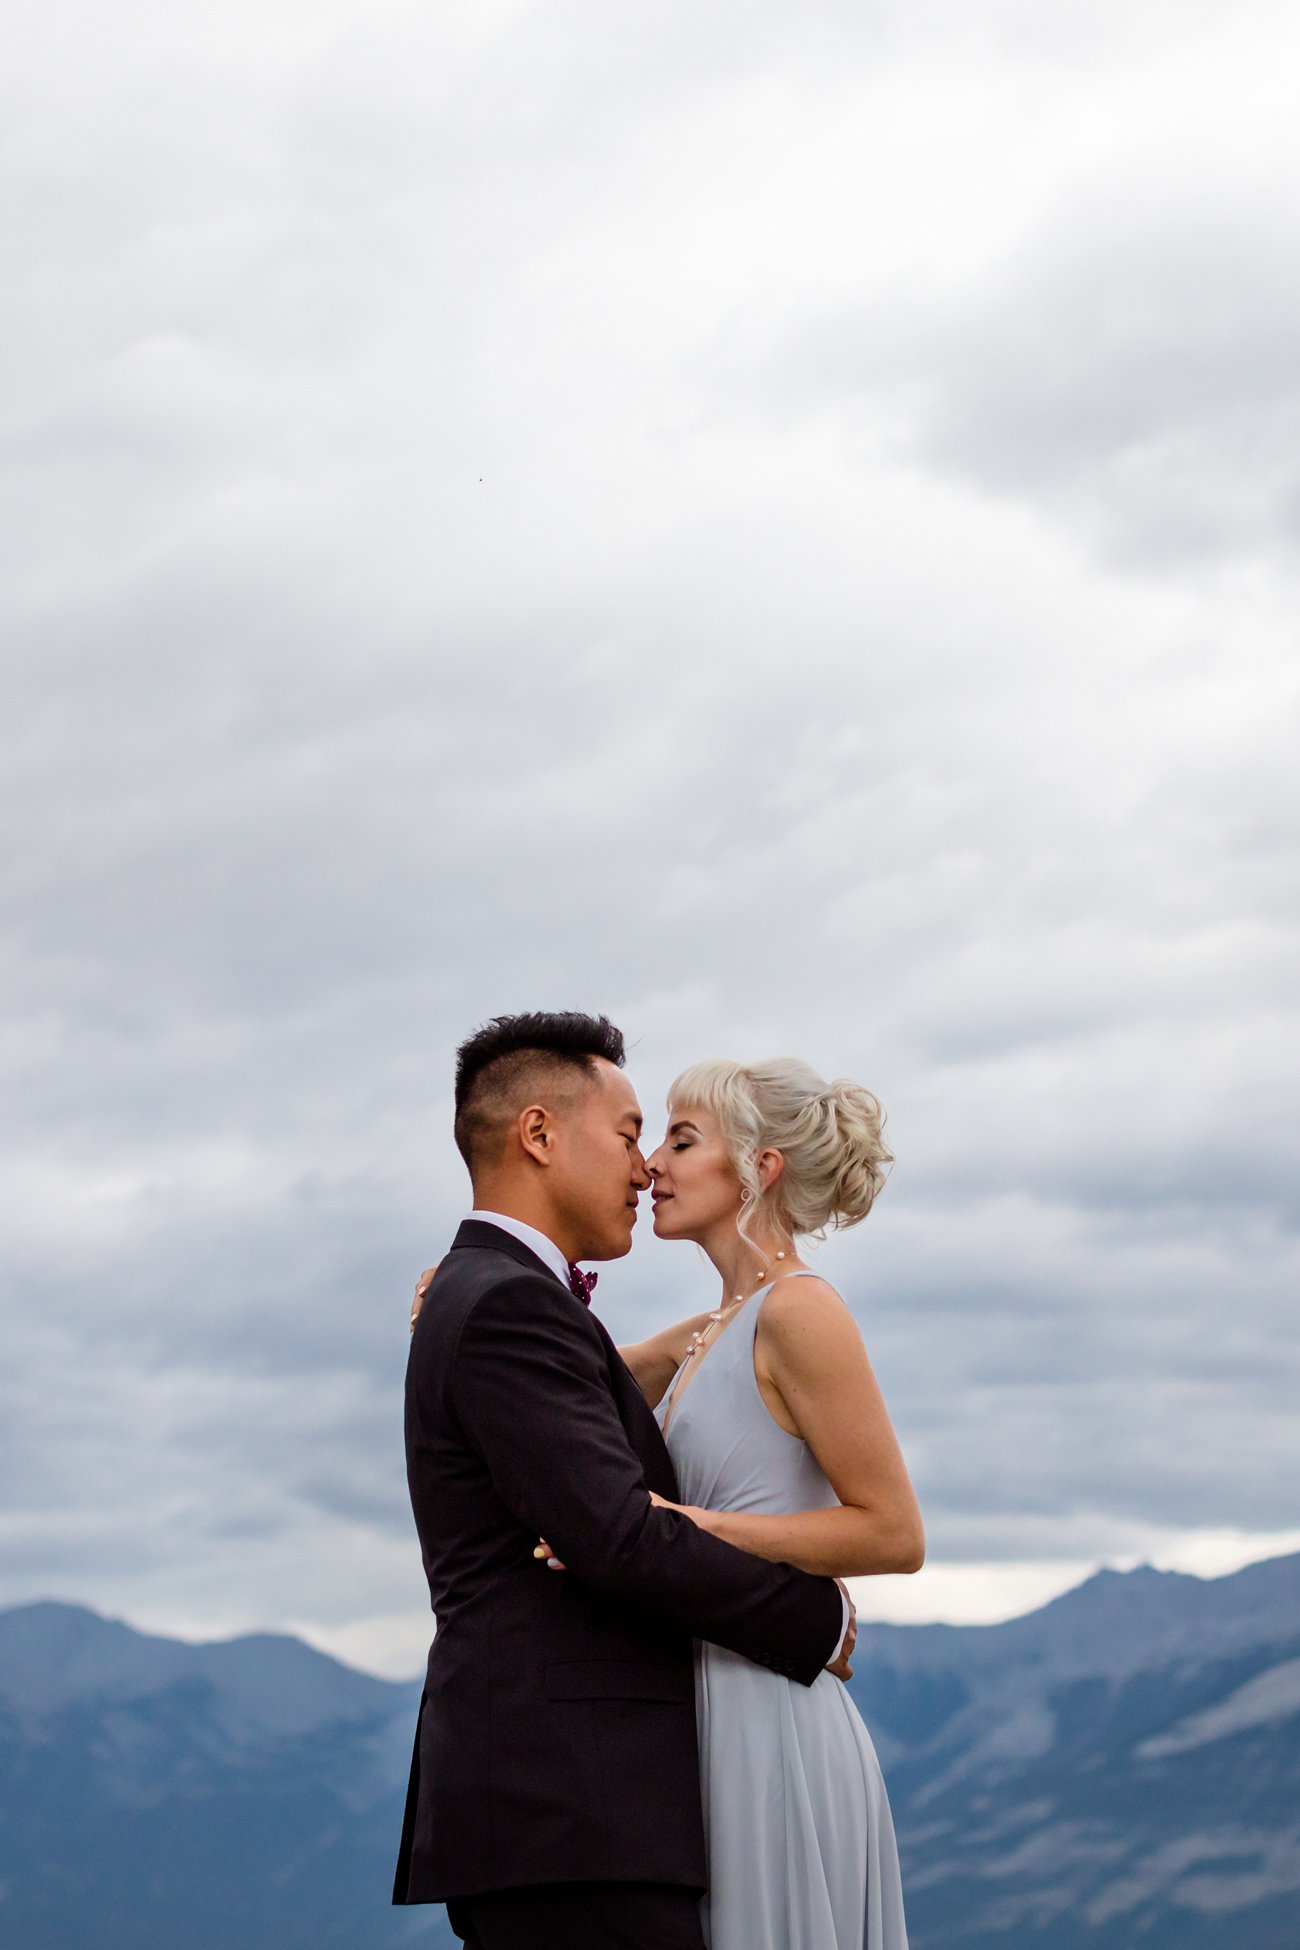 423-kendal-and-kevin--year-in-review-2021--wedding-photography.jpg